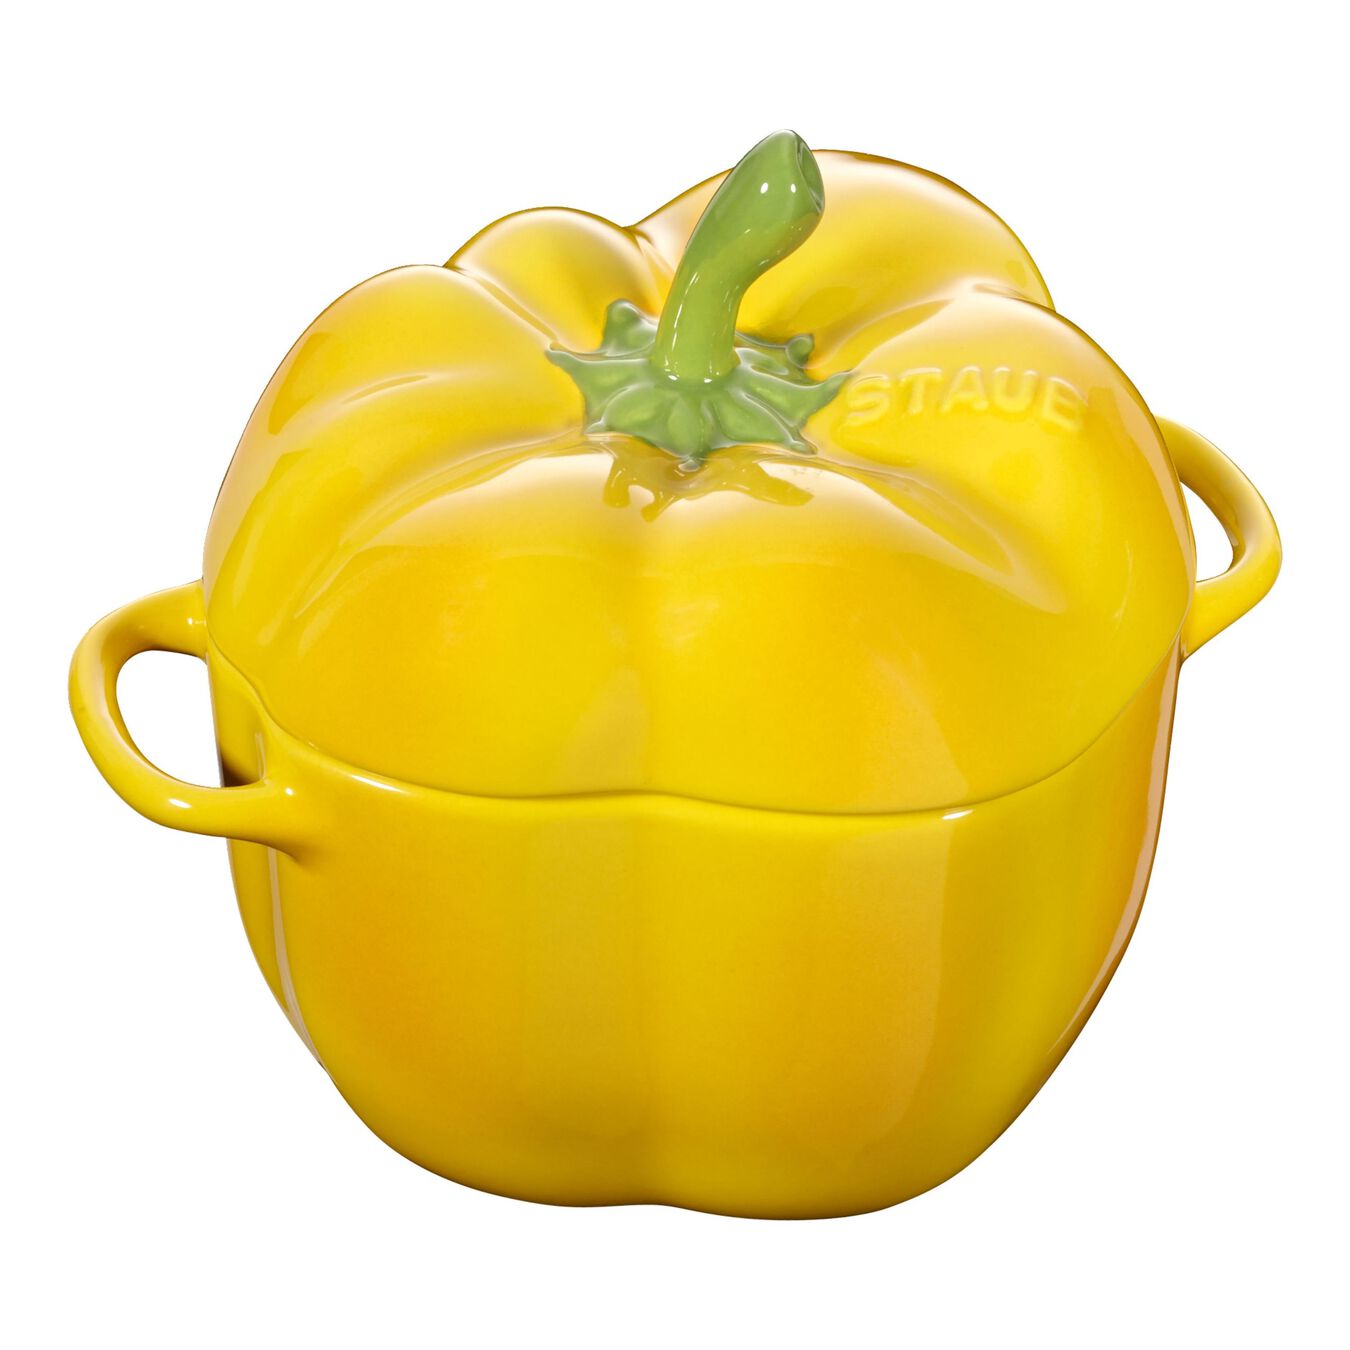 450 ml ceramic pepper Cocotte, yellow,,large 1